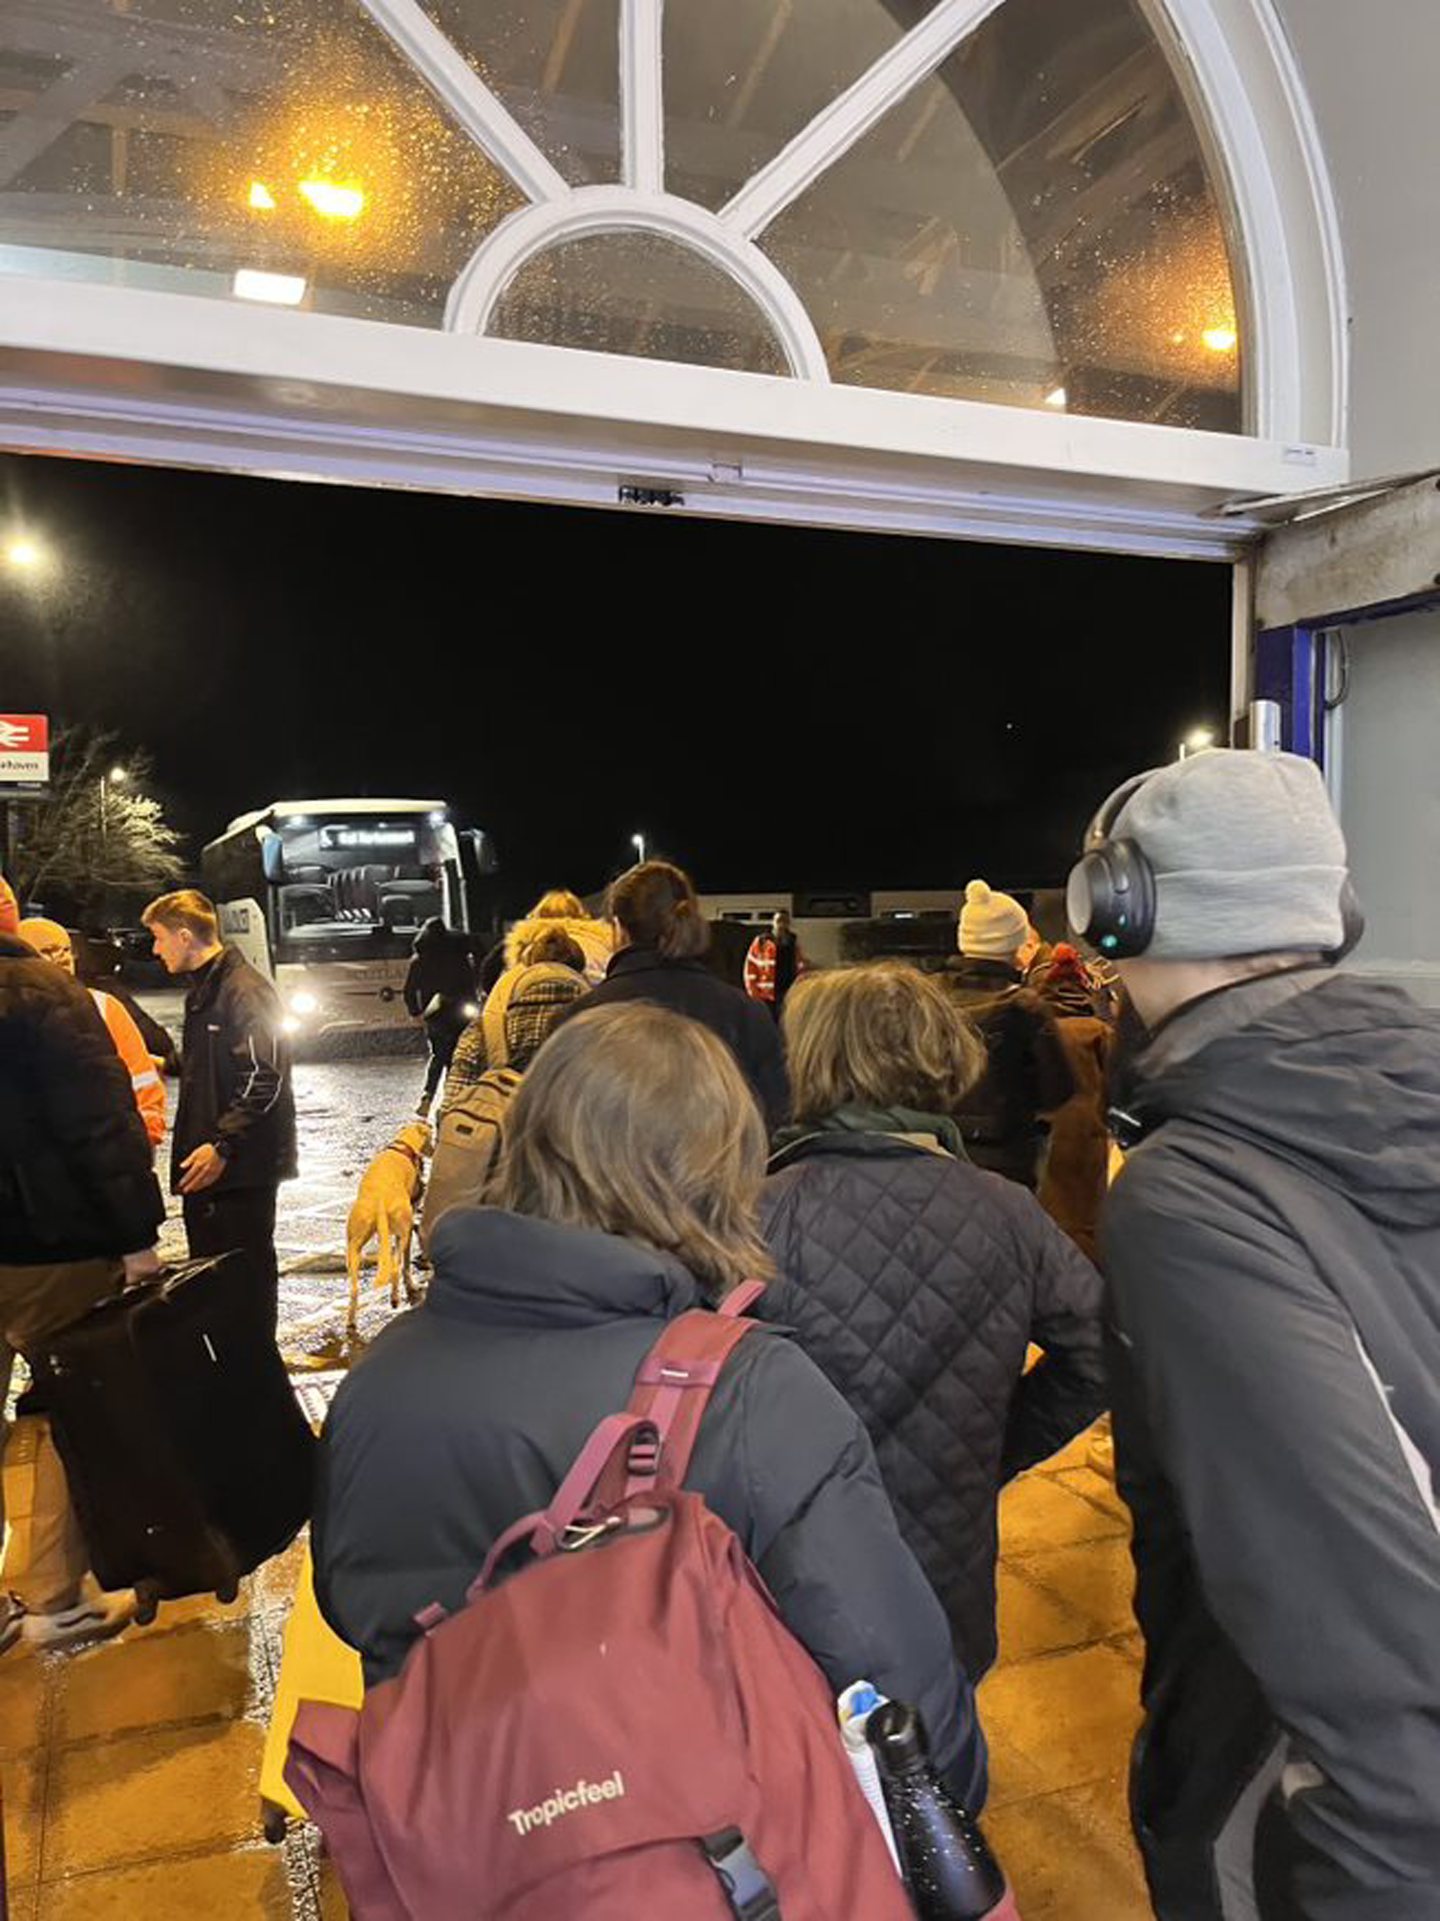 Passengers flock to the bus after waiting at Stonehaven station for seven hours.